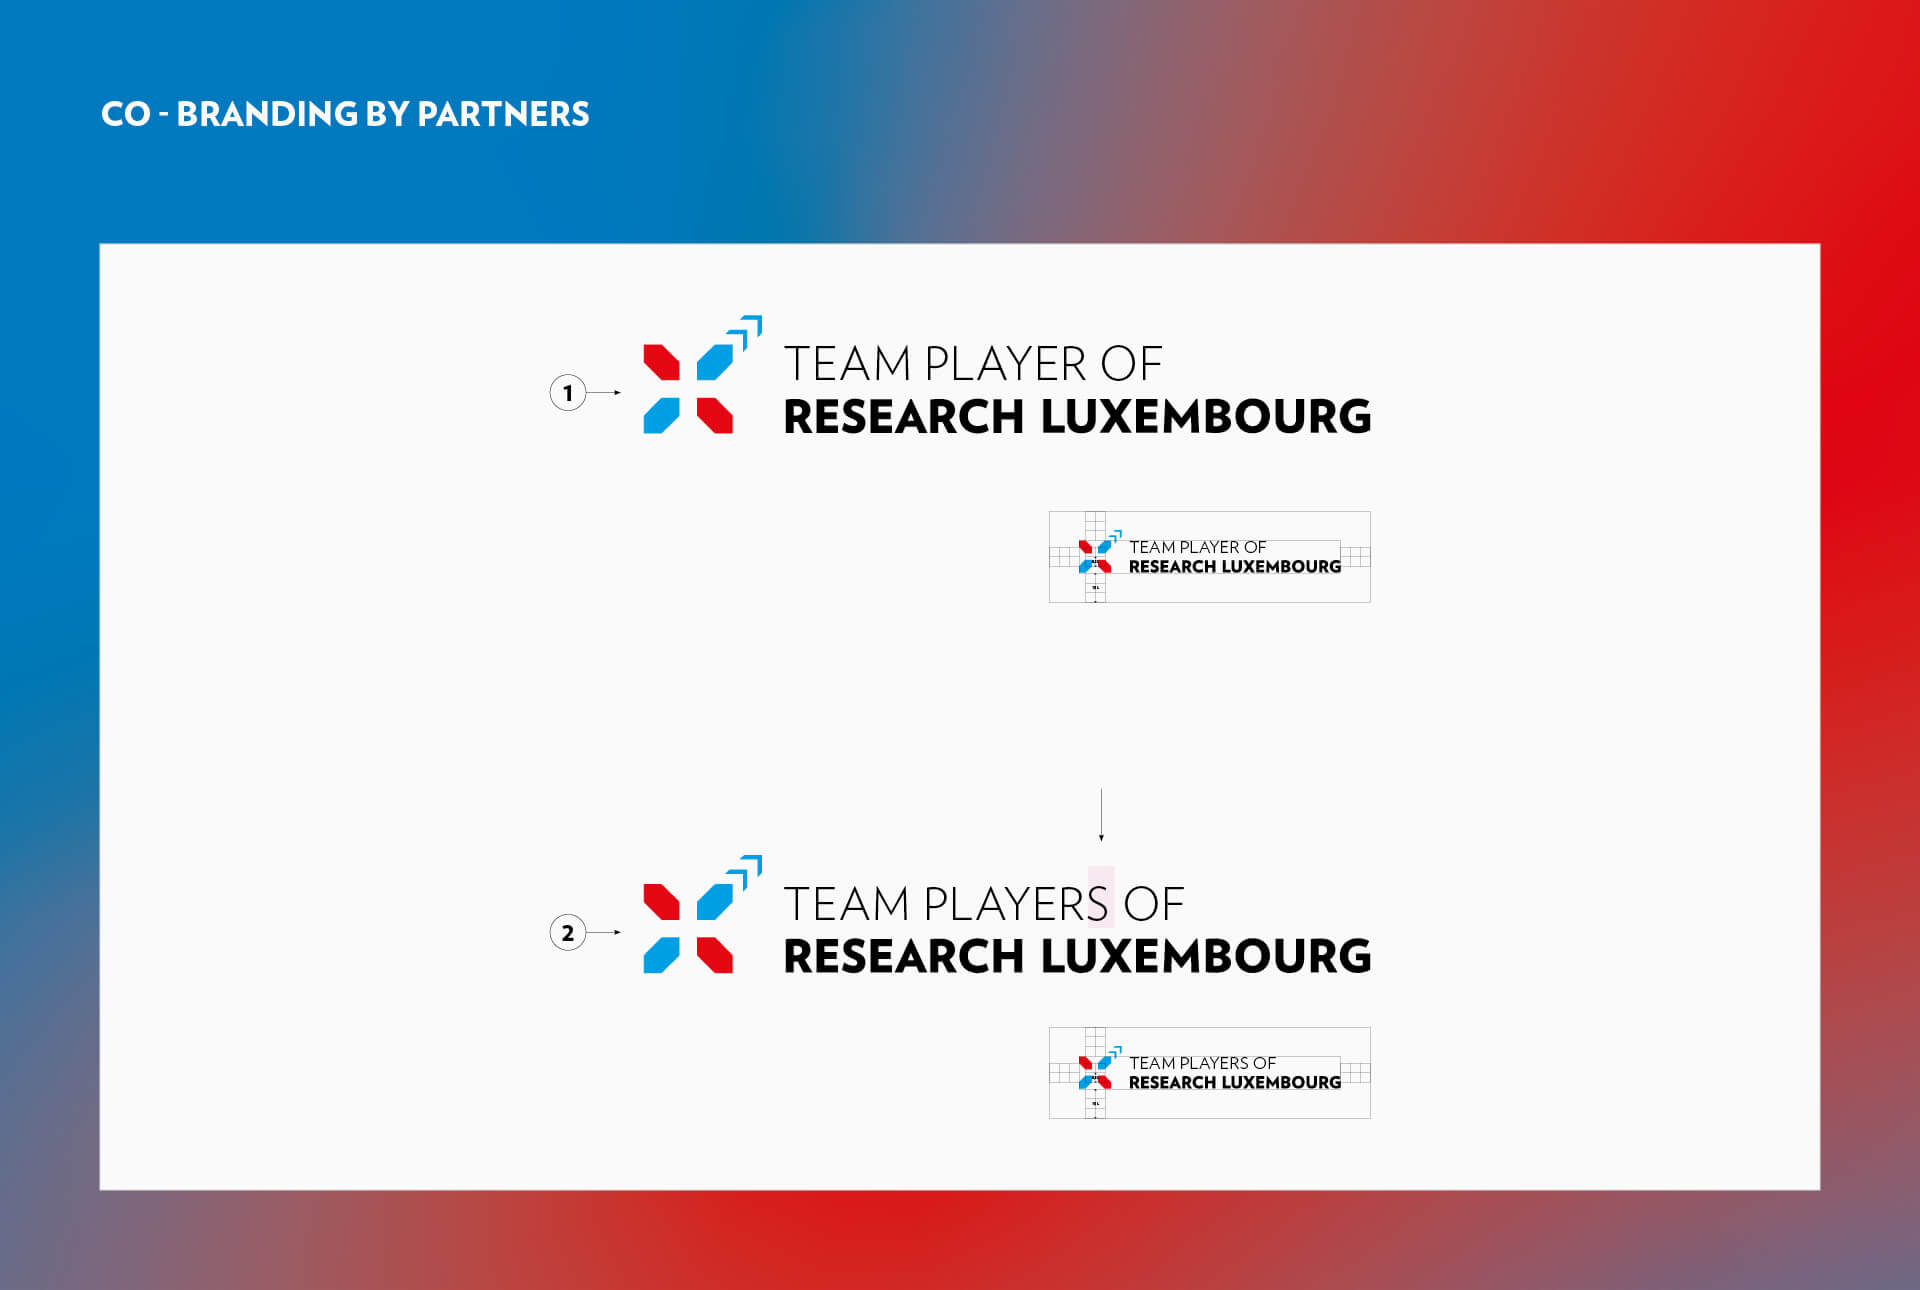 Research Luxembourg